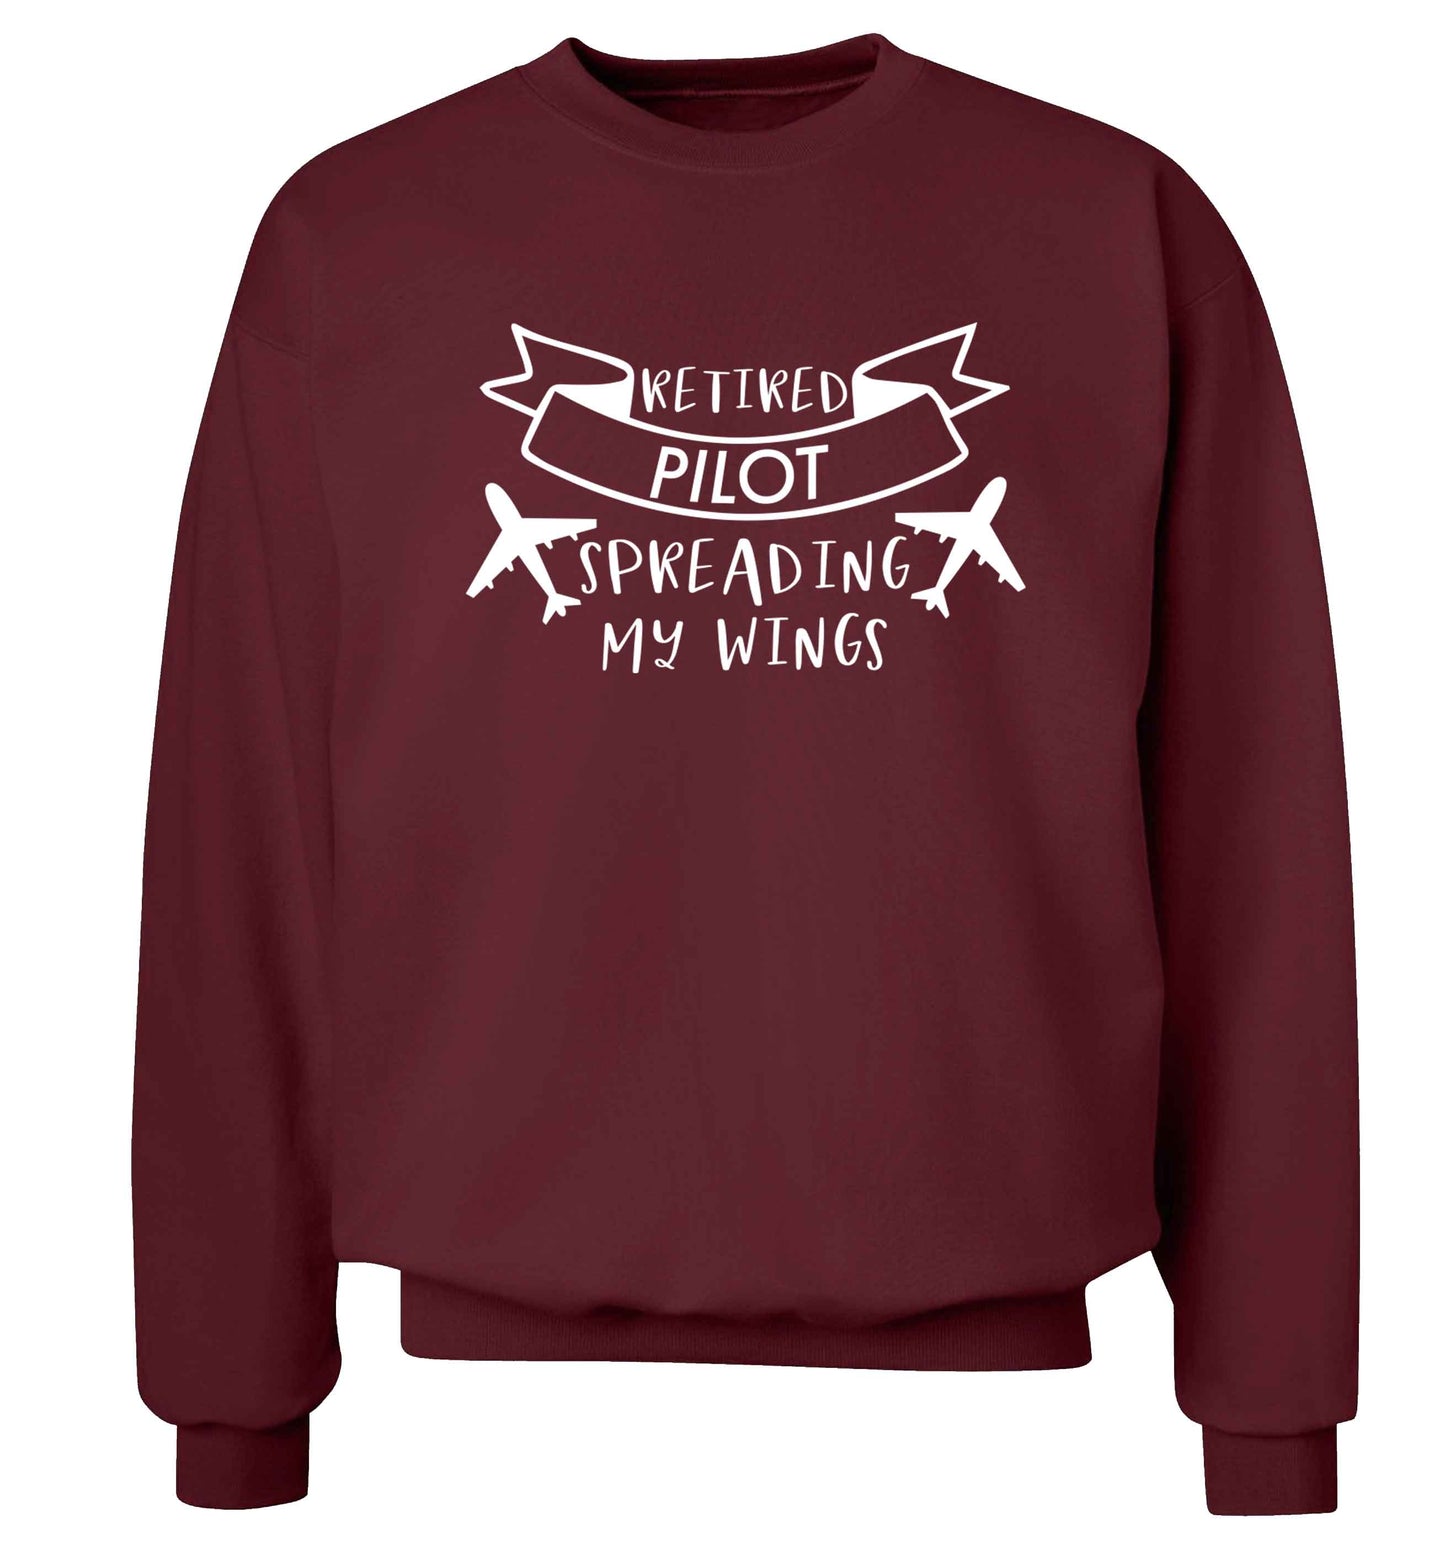 Retired pilot spreading my wings Adult's unisex maroon Sweater 2XL